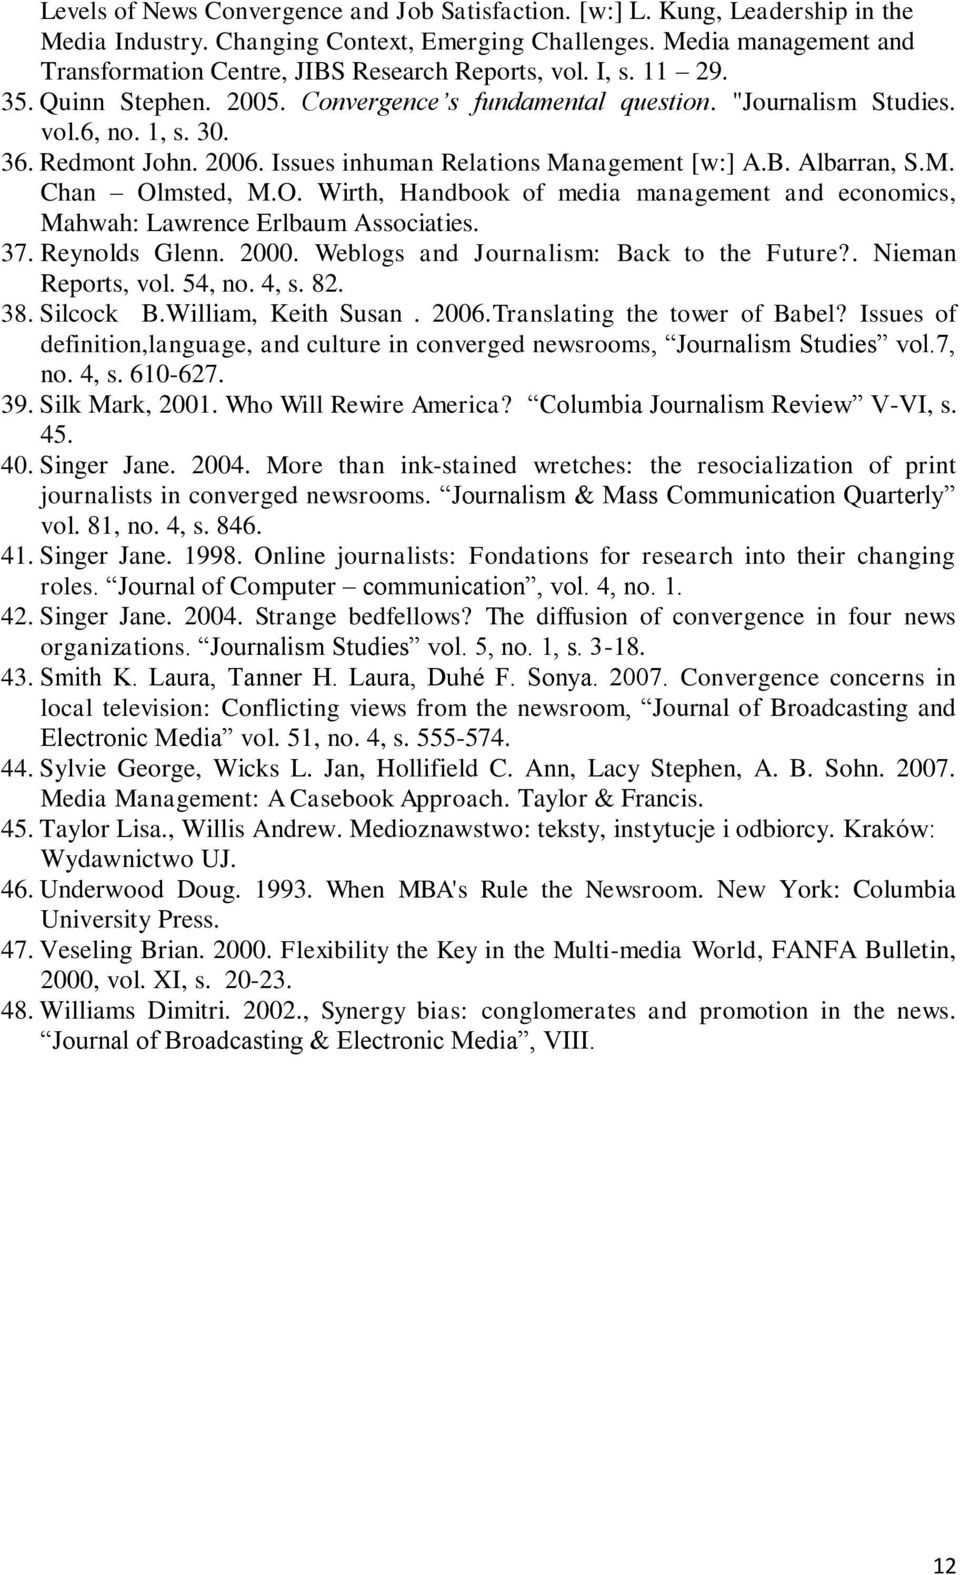 Redmont John. 2006. Issues inhuman Relations Management [w:] A.B. Albarran, S.M. Chan Olmsted, M.O. Wirth, Handbook of media management and economics, Mahwah: Lawrence Erlbaum Associaties. 37.